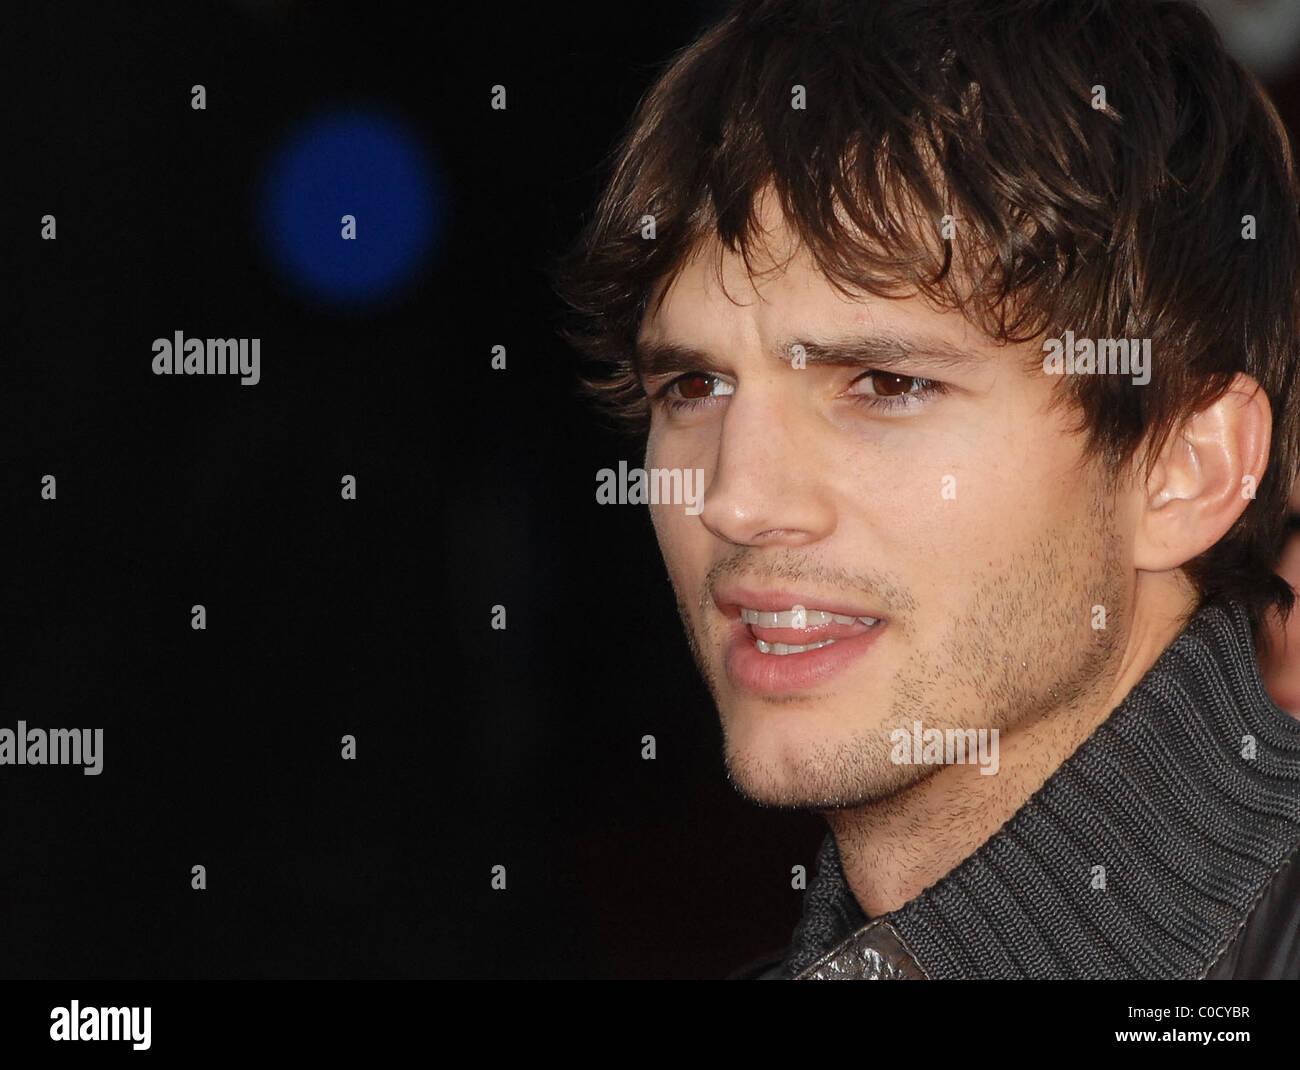 Ashton Kutcher at the premiere of 'What Happens In Vegas' at Odeon,Leicester Square London,England- 22.04.08  : Stock Photo